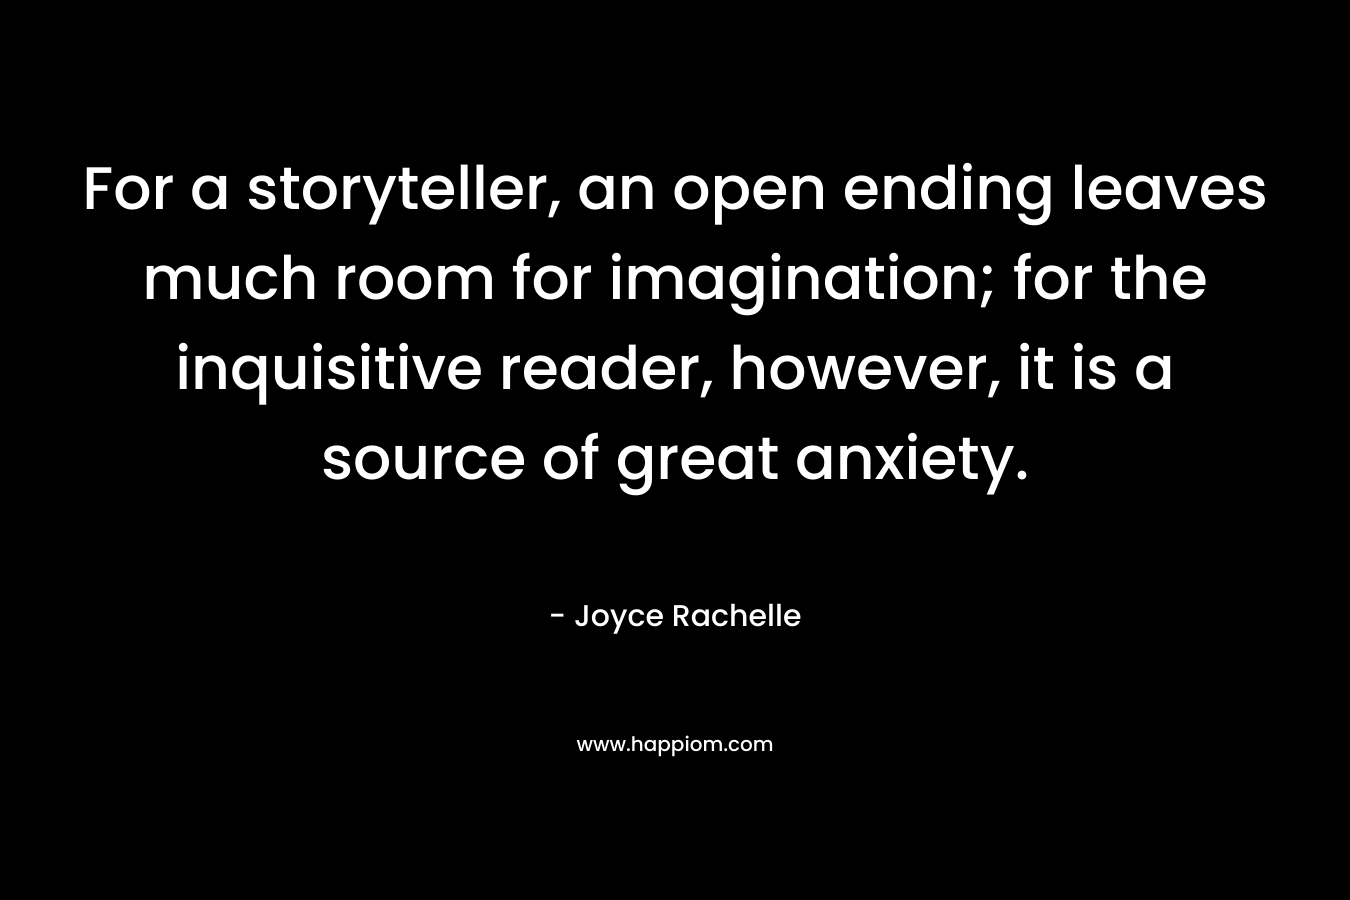 For a storyteller, an open ending leaves much room for imagination; for the inquisitive reader, however, it is a source of great anxiety.